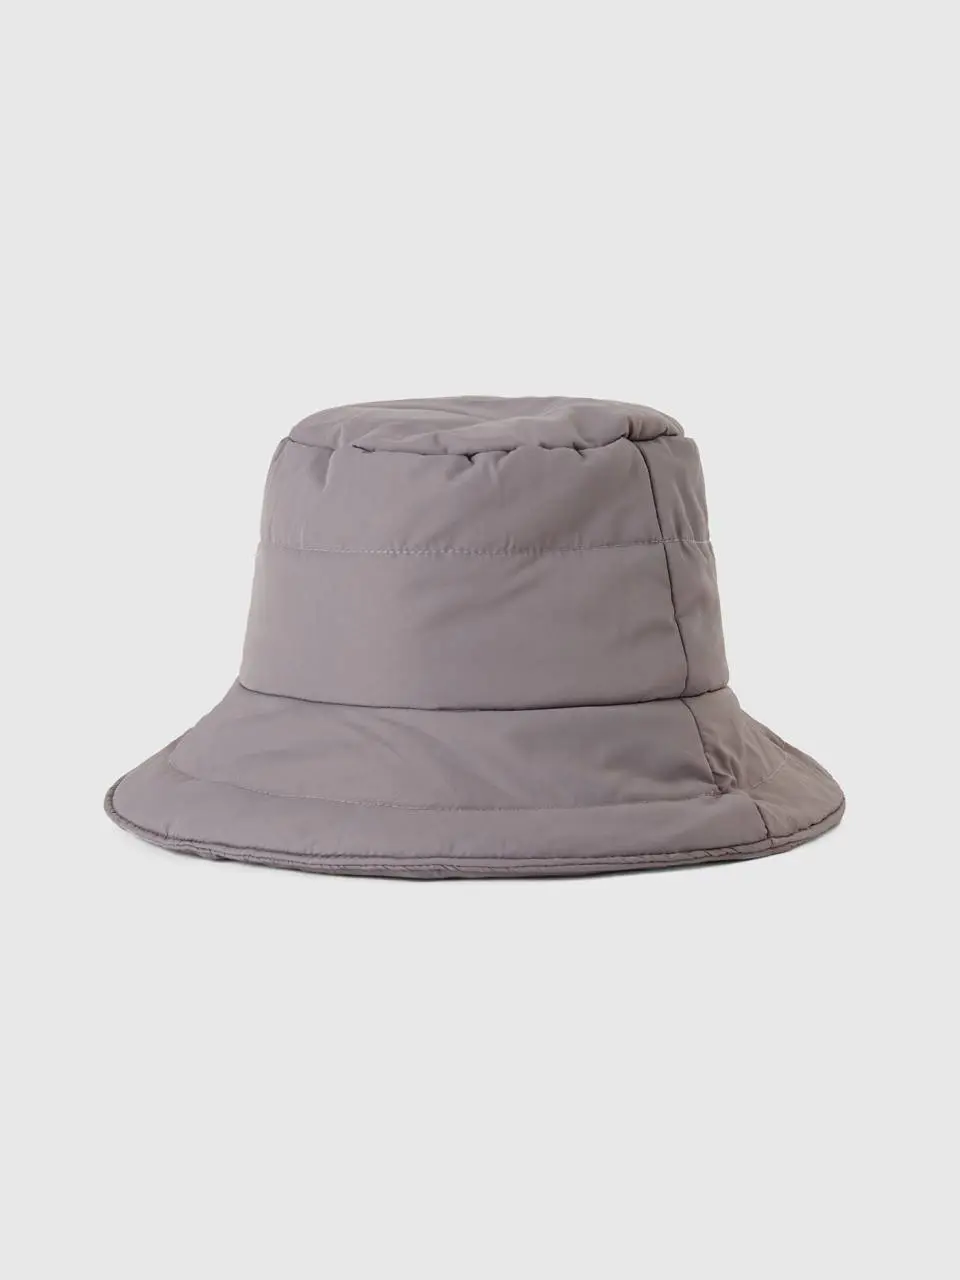 Benetton quilted padded hat. 1